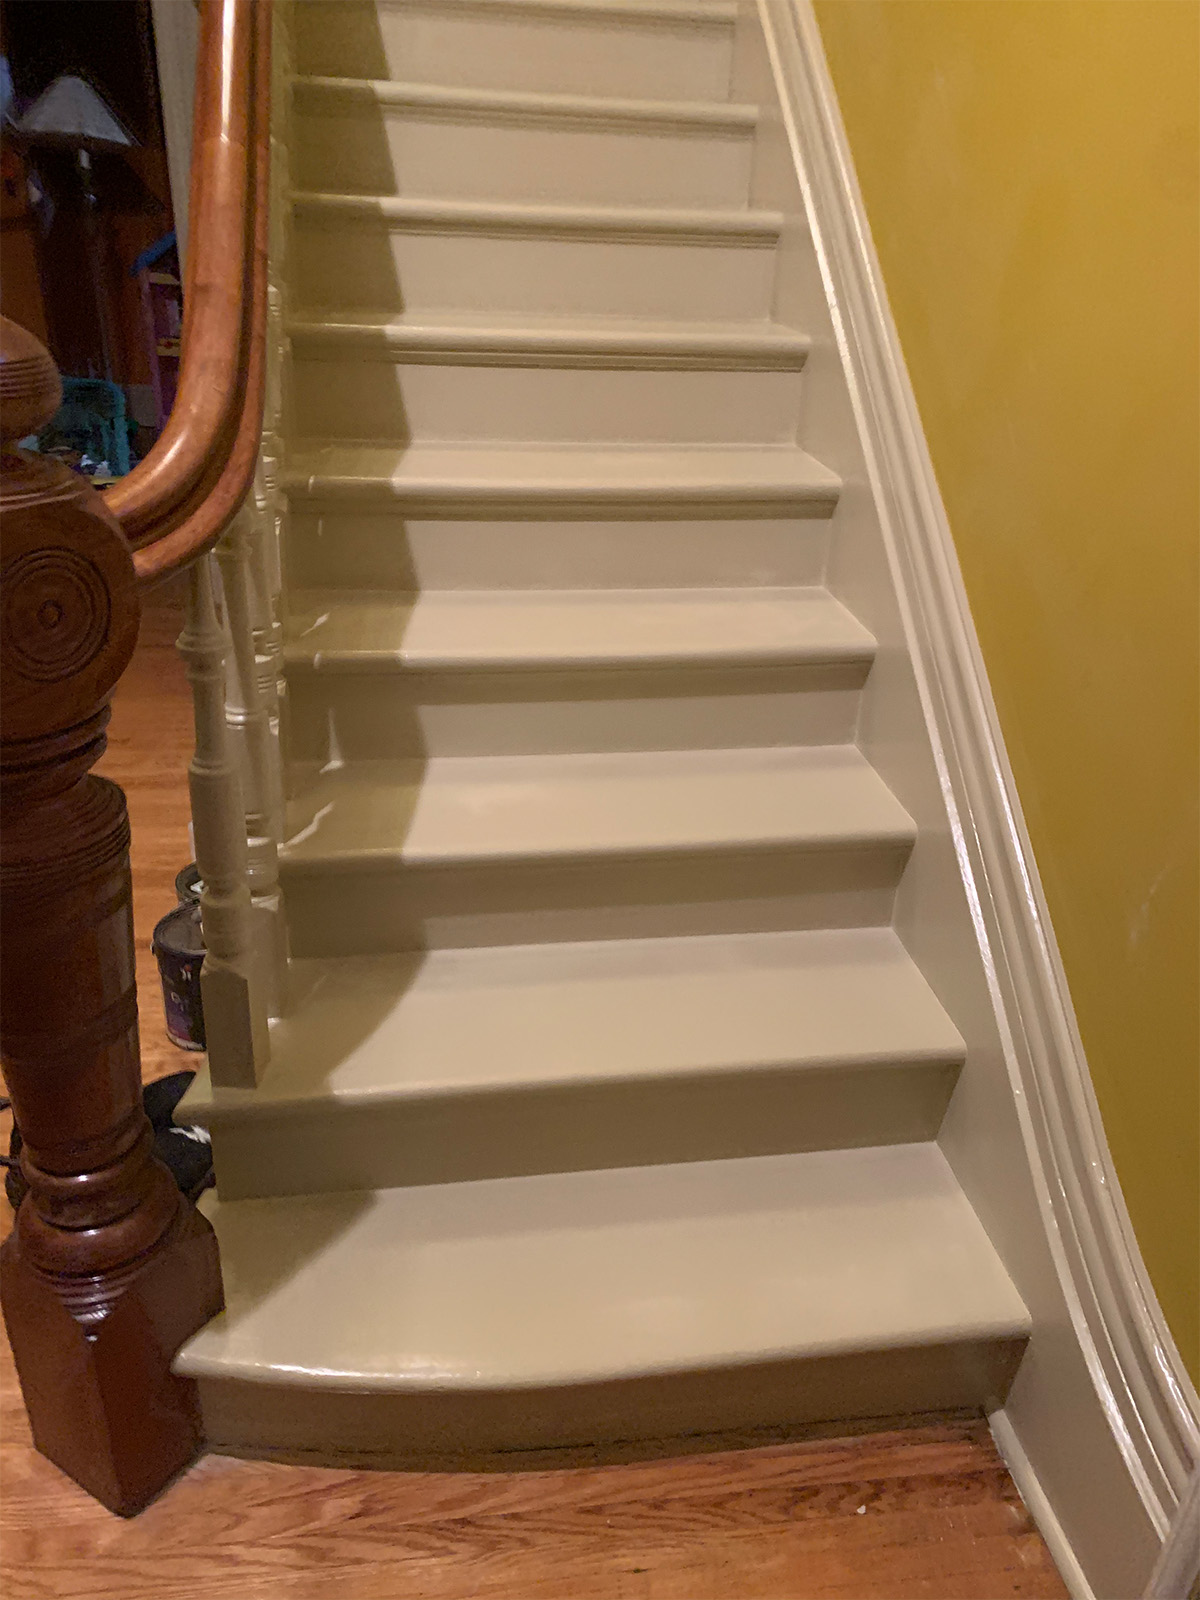 Victorian Home Interior Steps After Painting